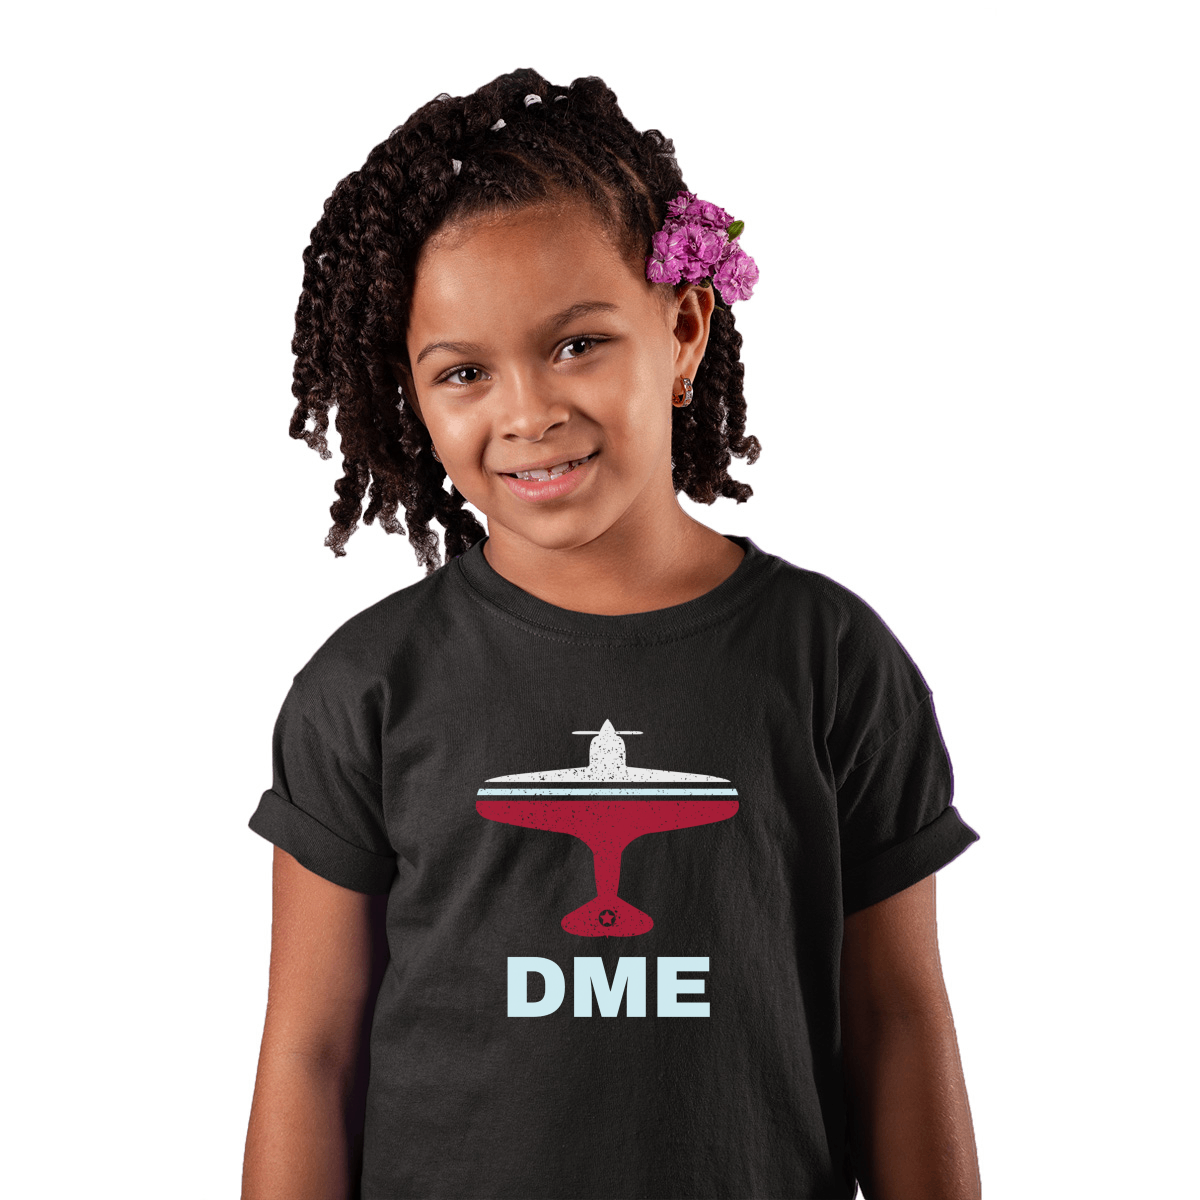 Fly Moscow DME Airport Kids T-shirt | Black